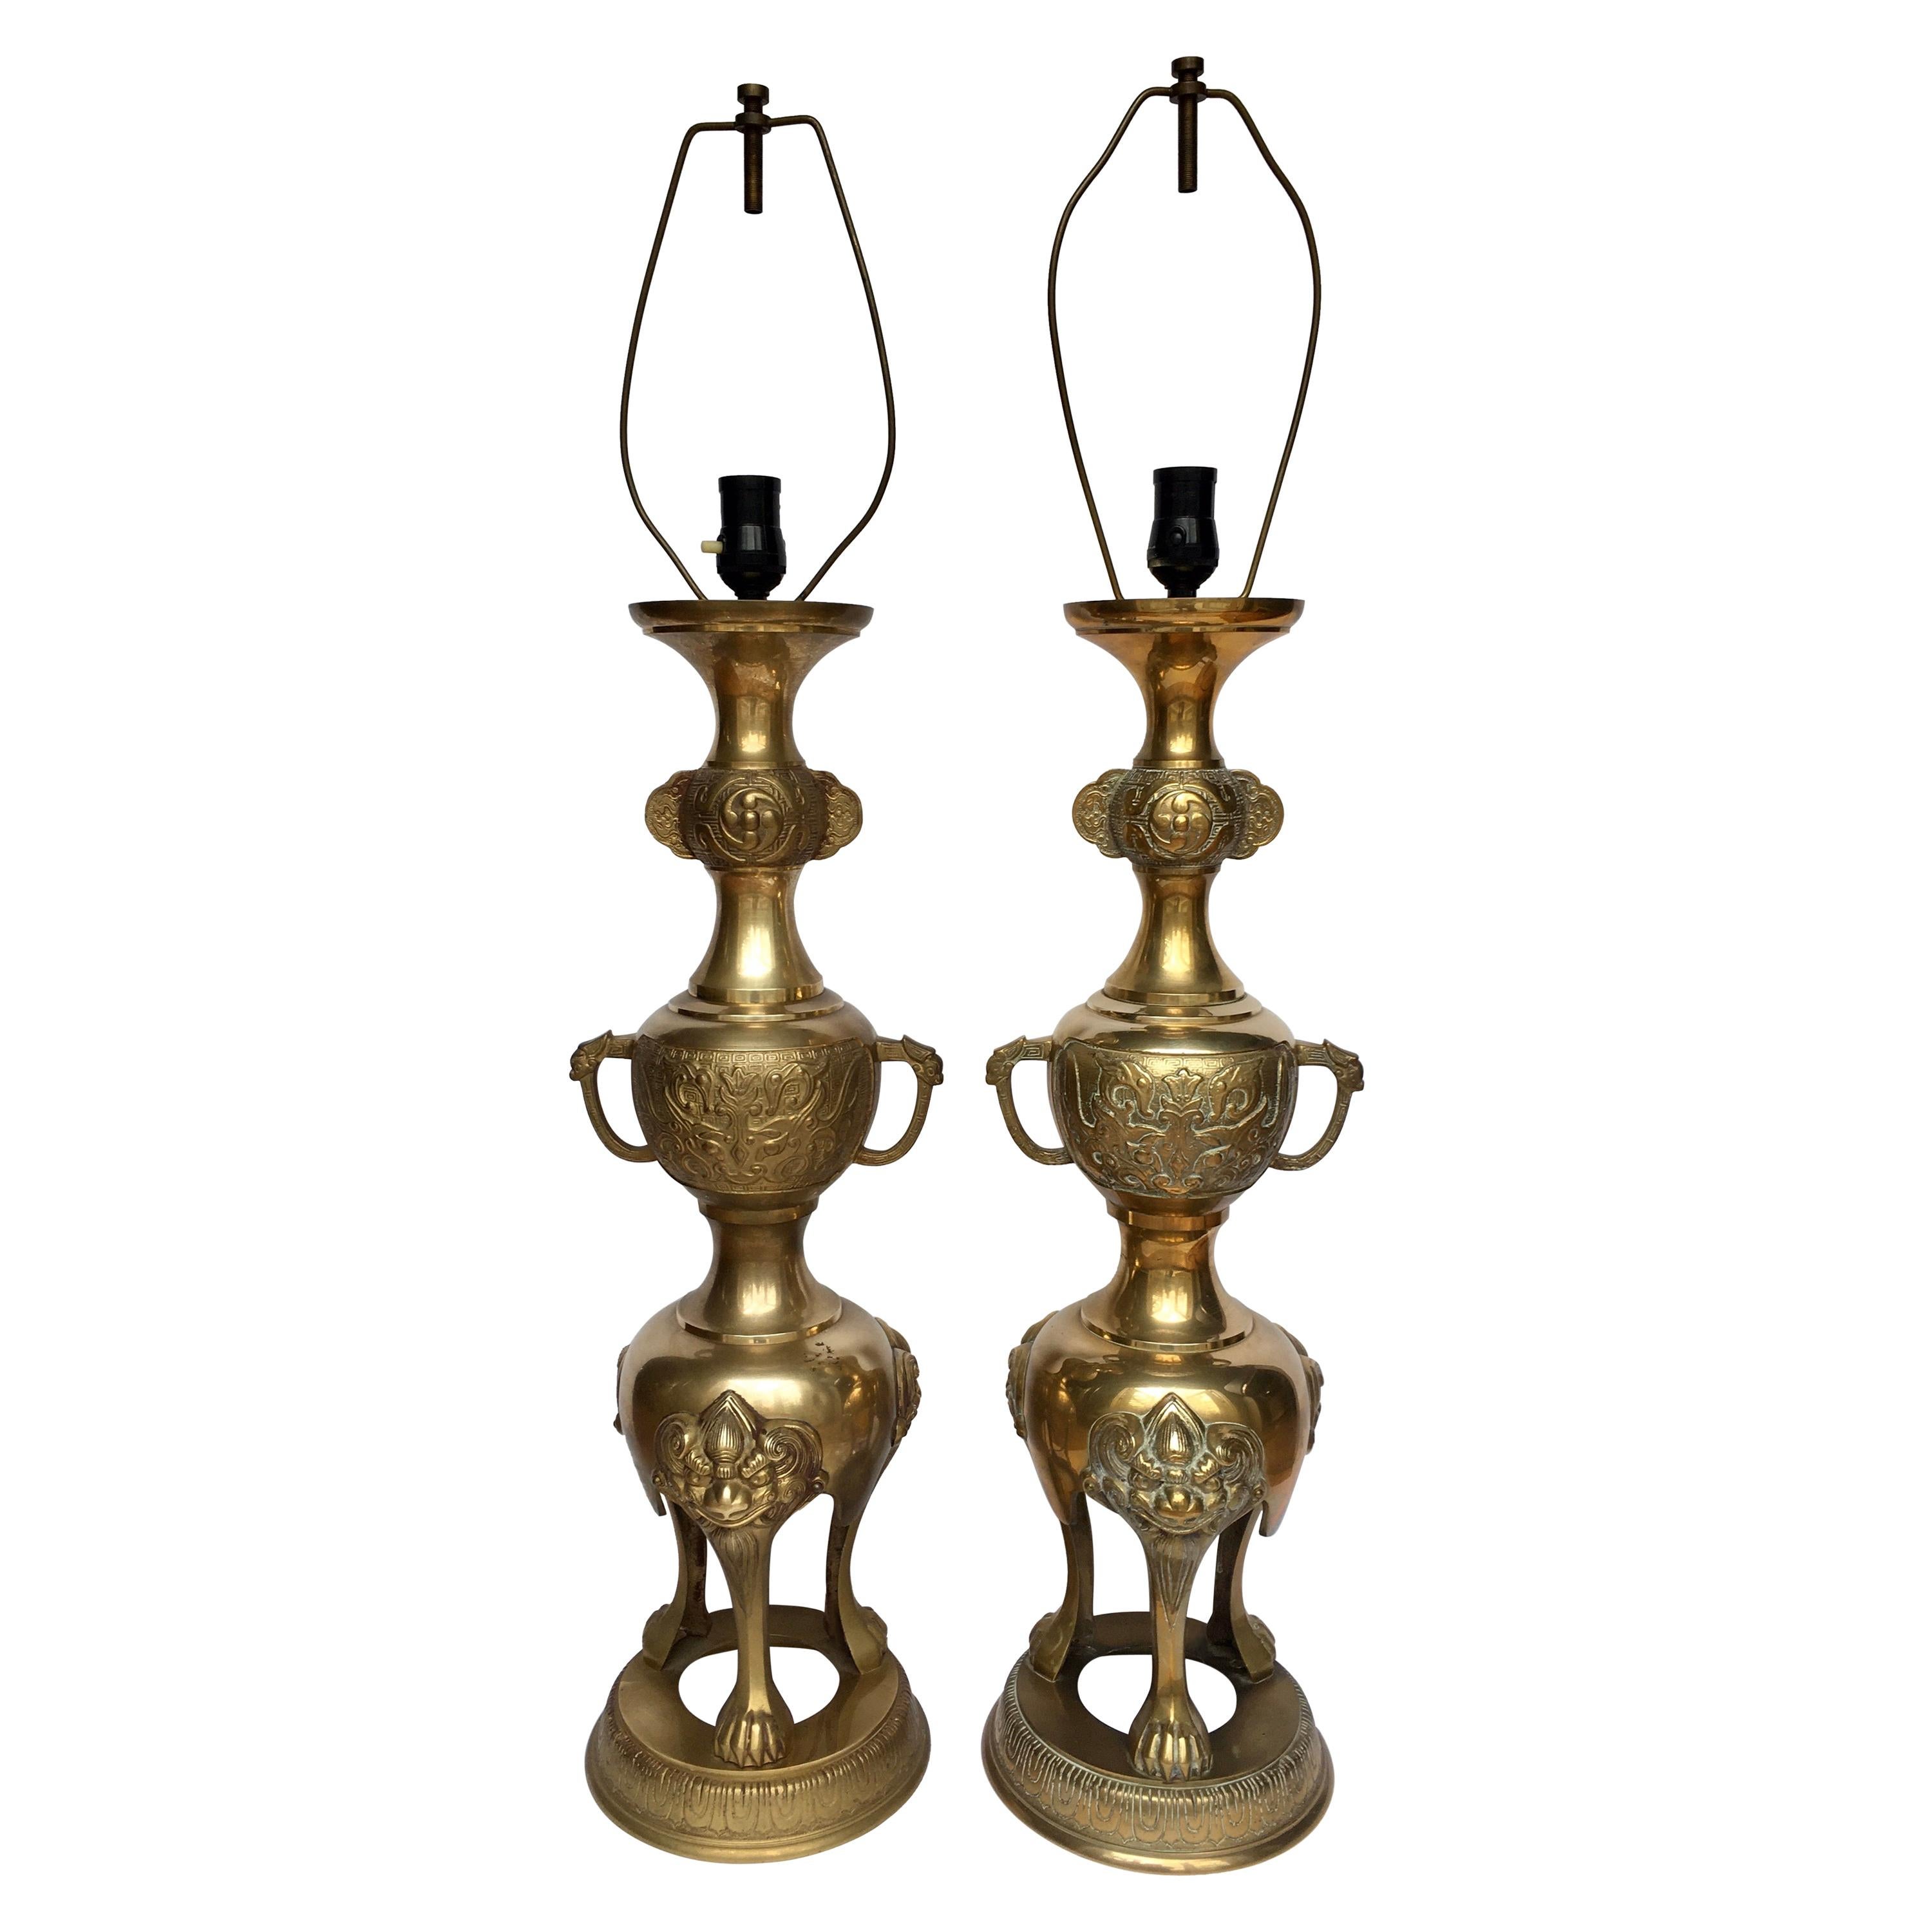 Foo Dog Hollywood Regency Chinoiserie Brass Lamps, James Mont Style, Pair